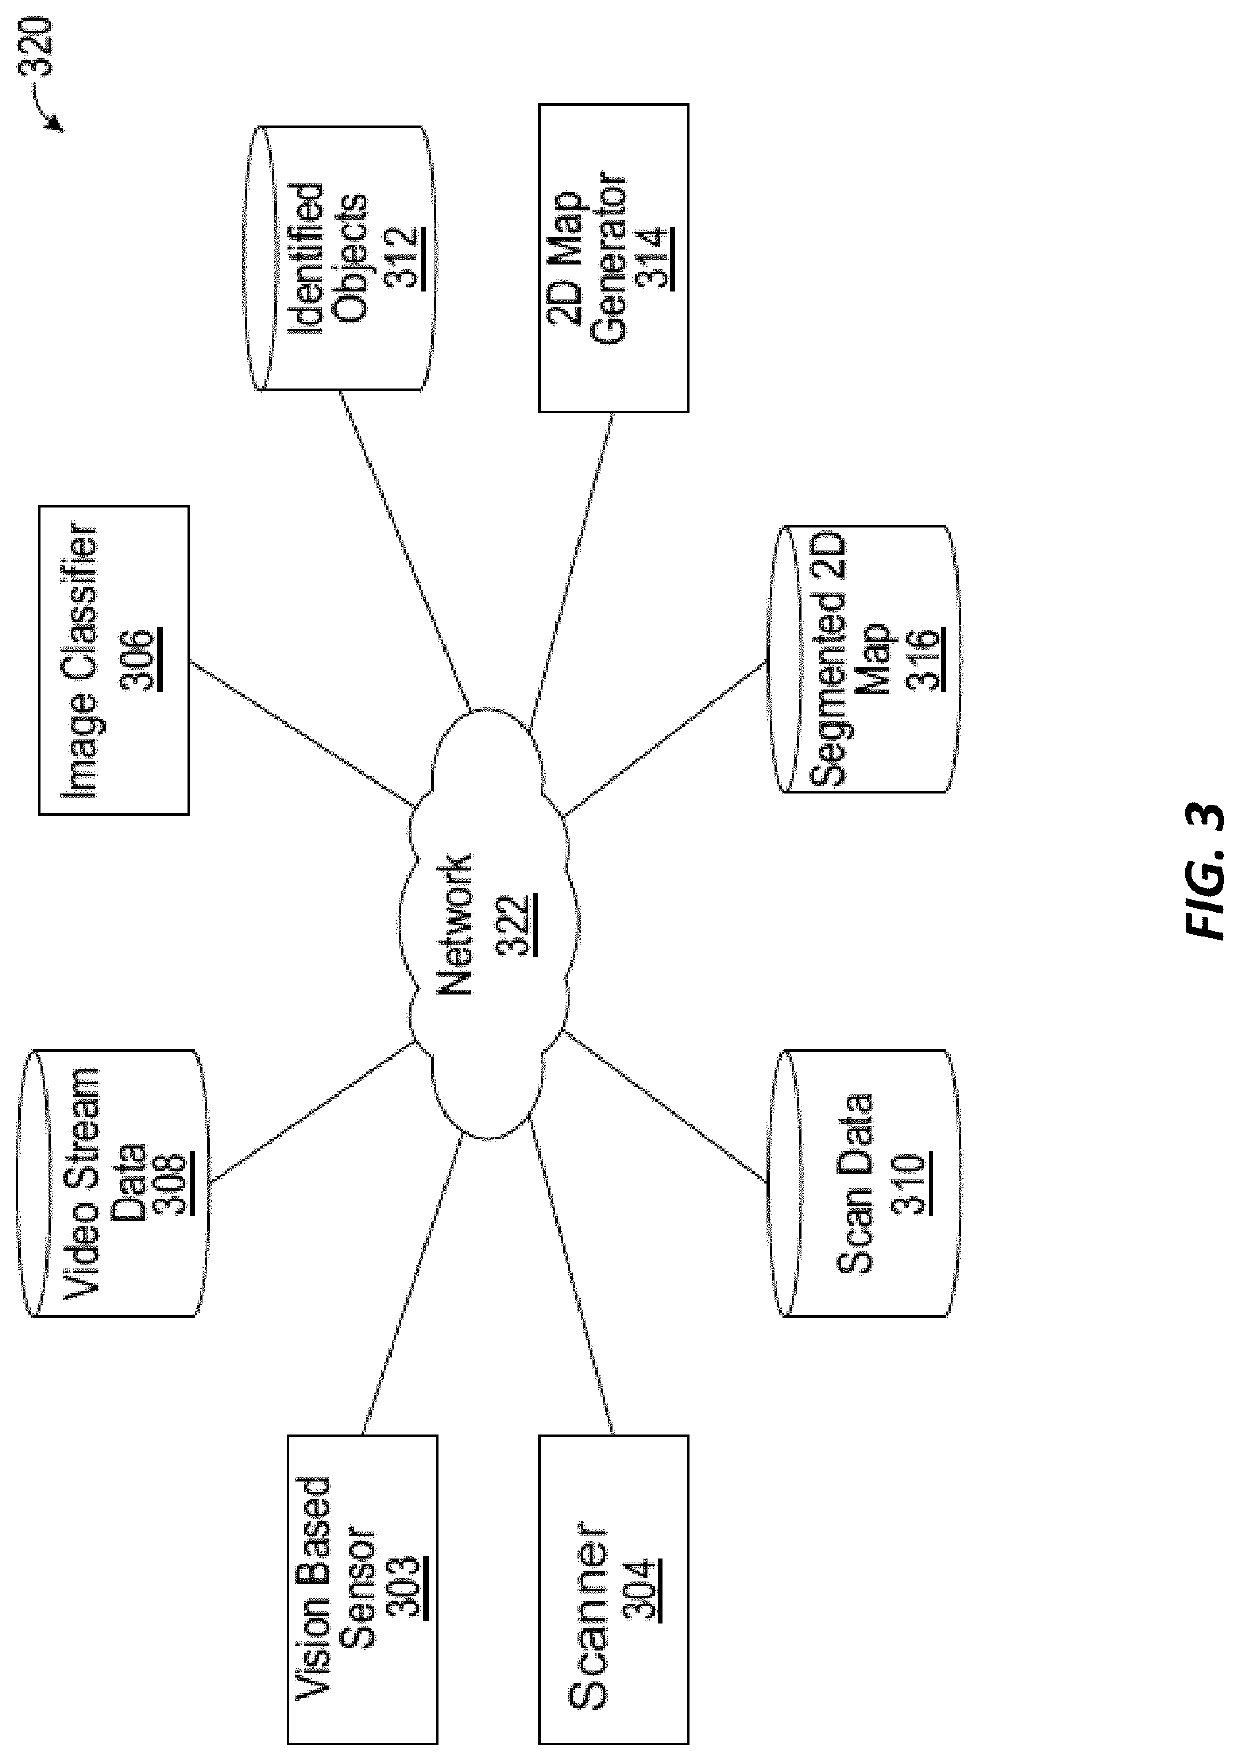 System and method of automatic room segmentation for two-dimensional laser floorplans